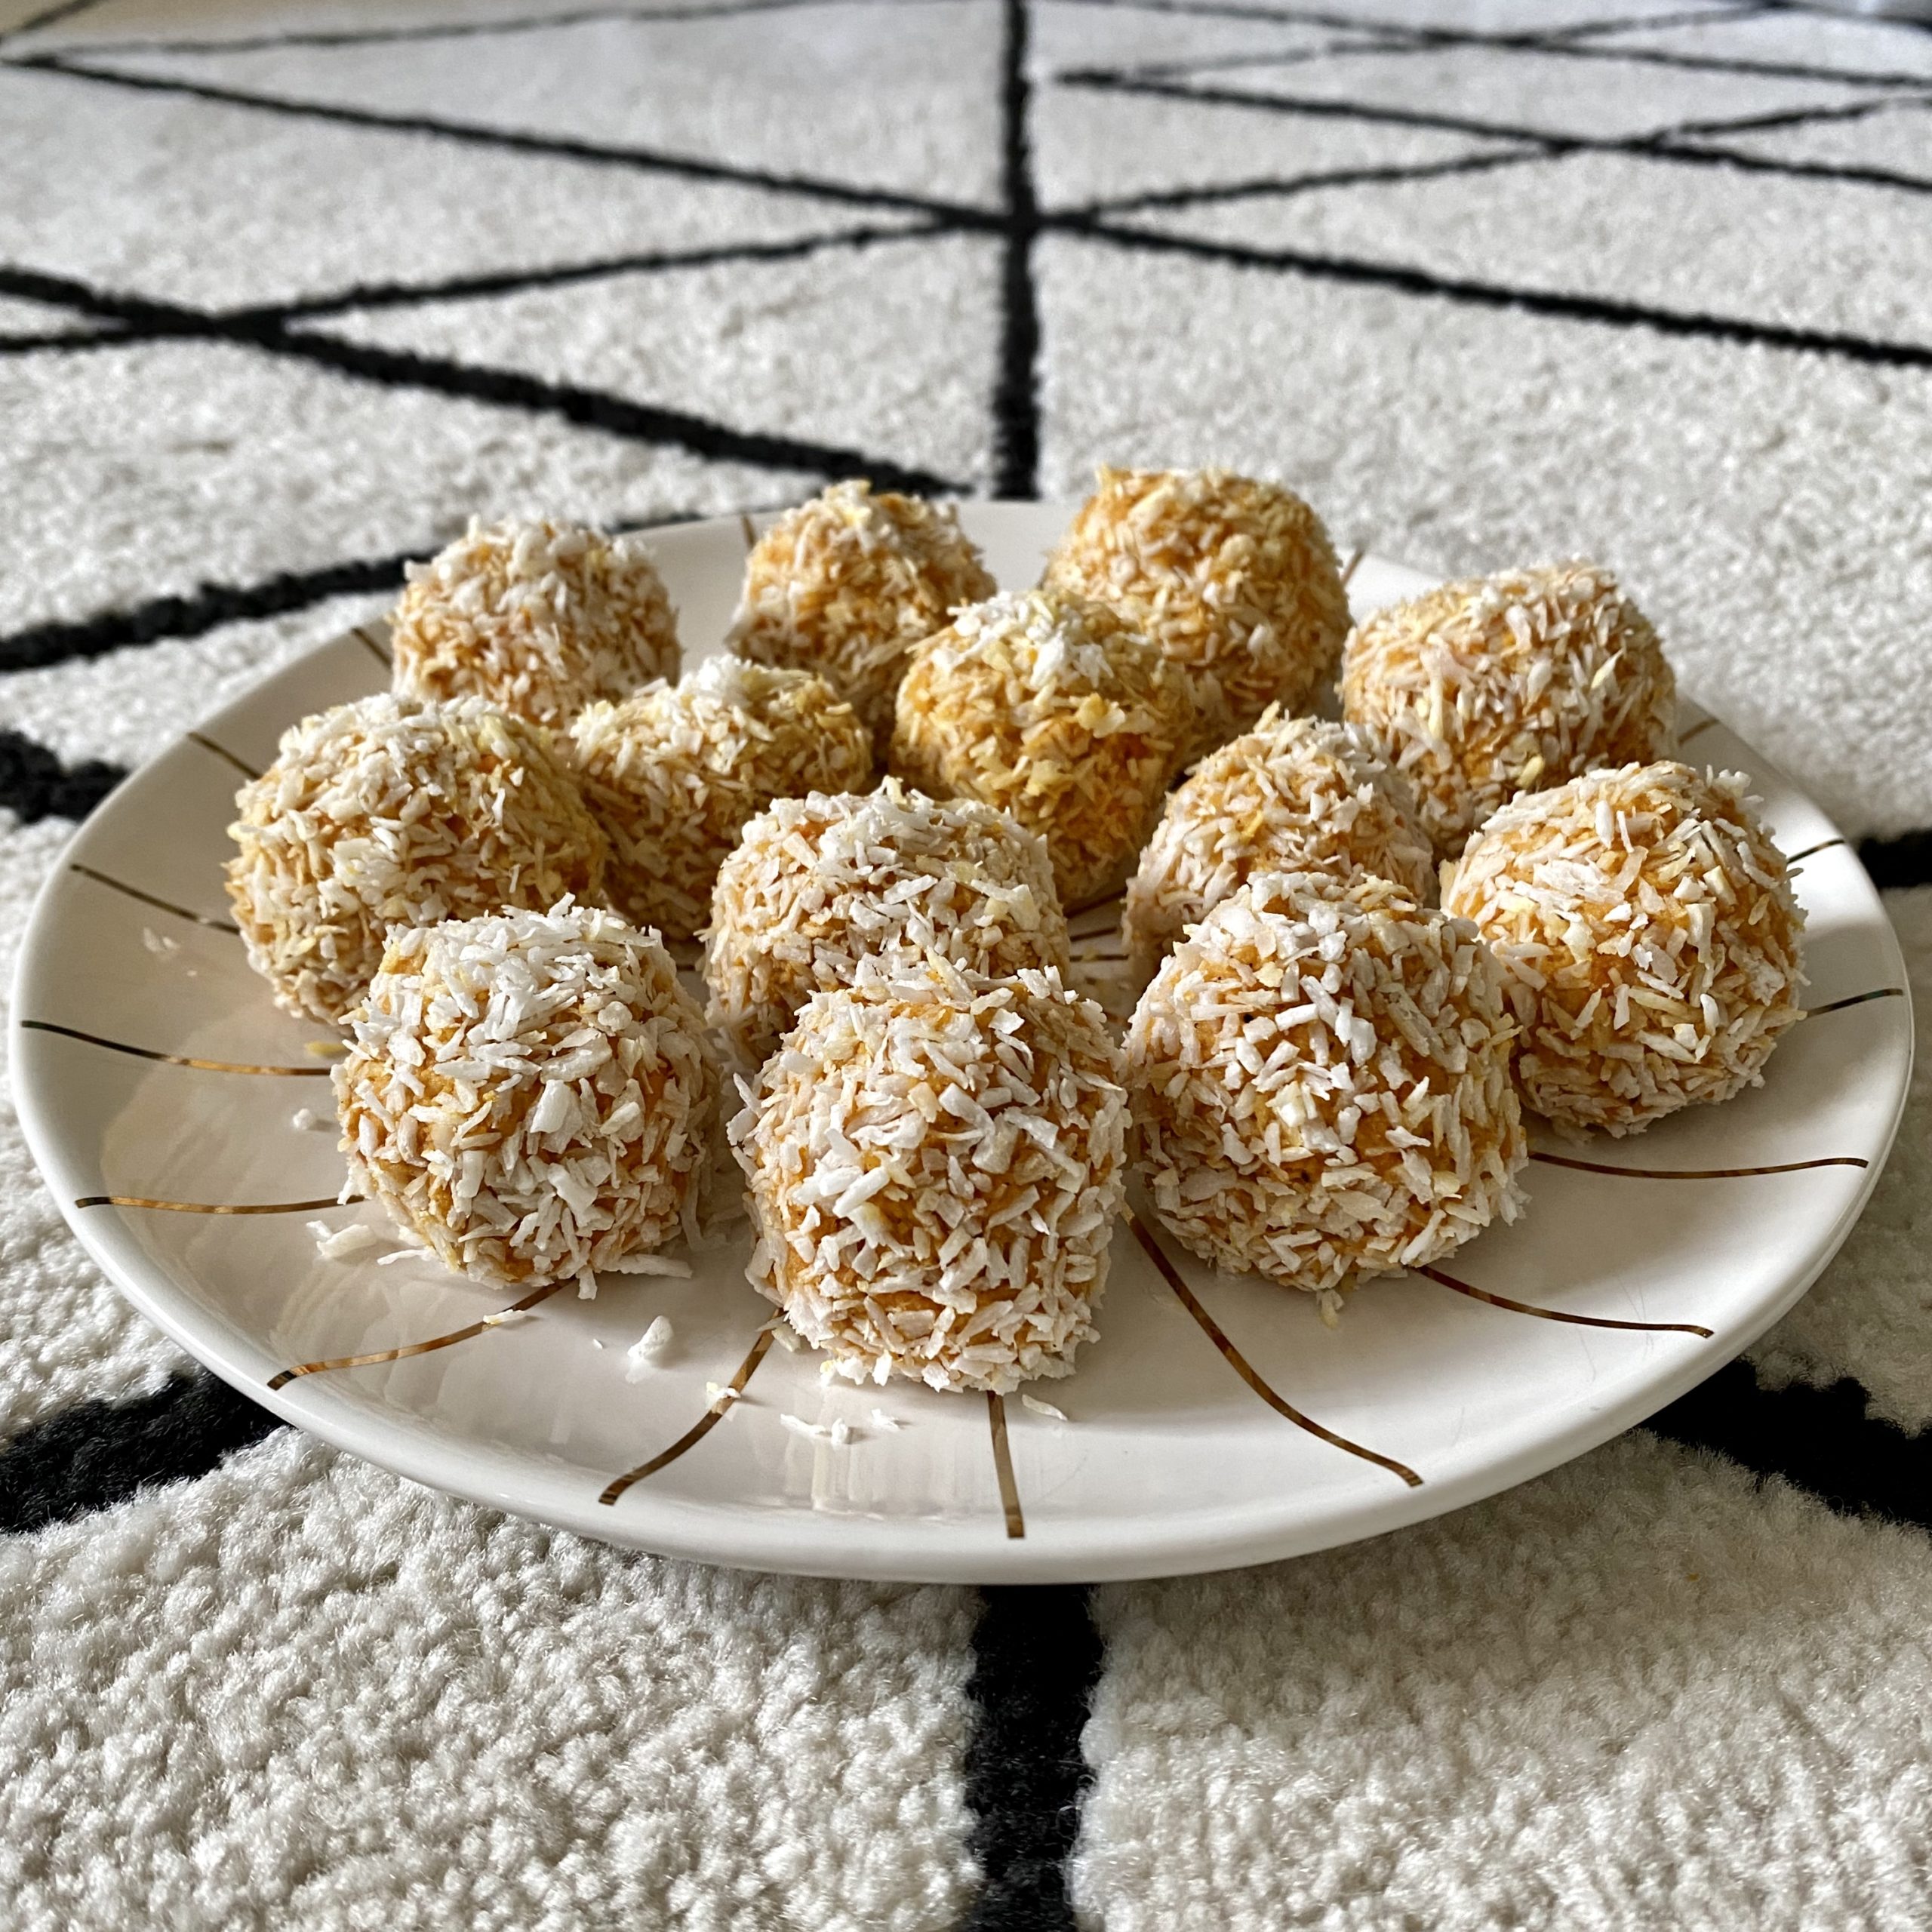 IMG 5289 scaled - Coconut-carrot energy balls for a snack